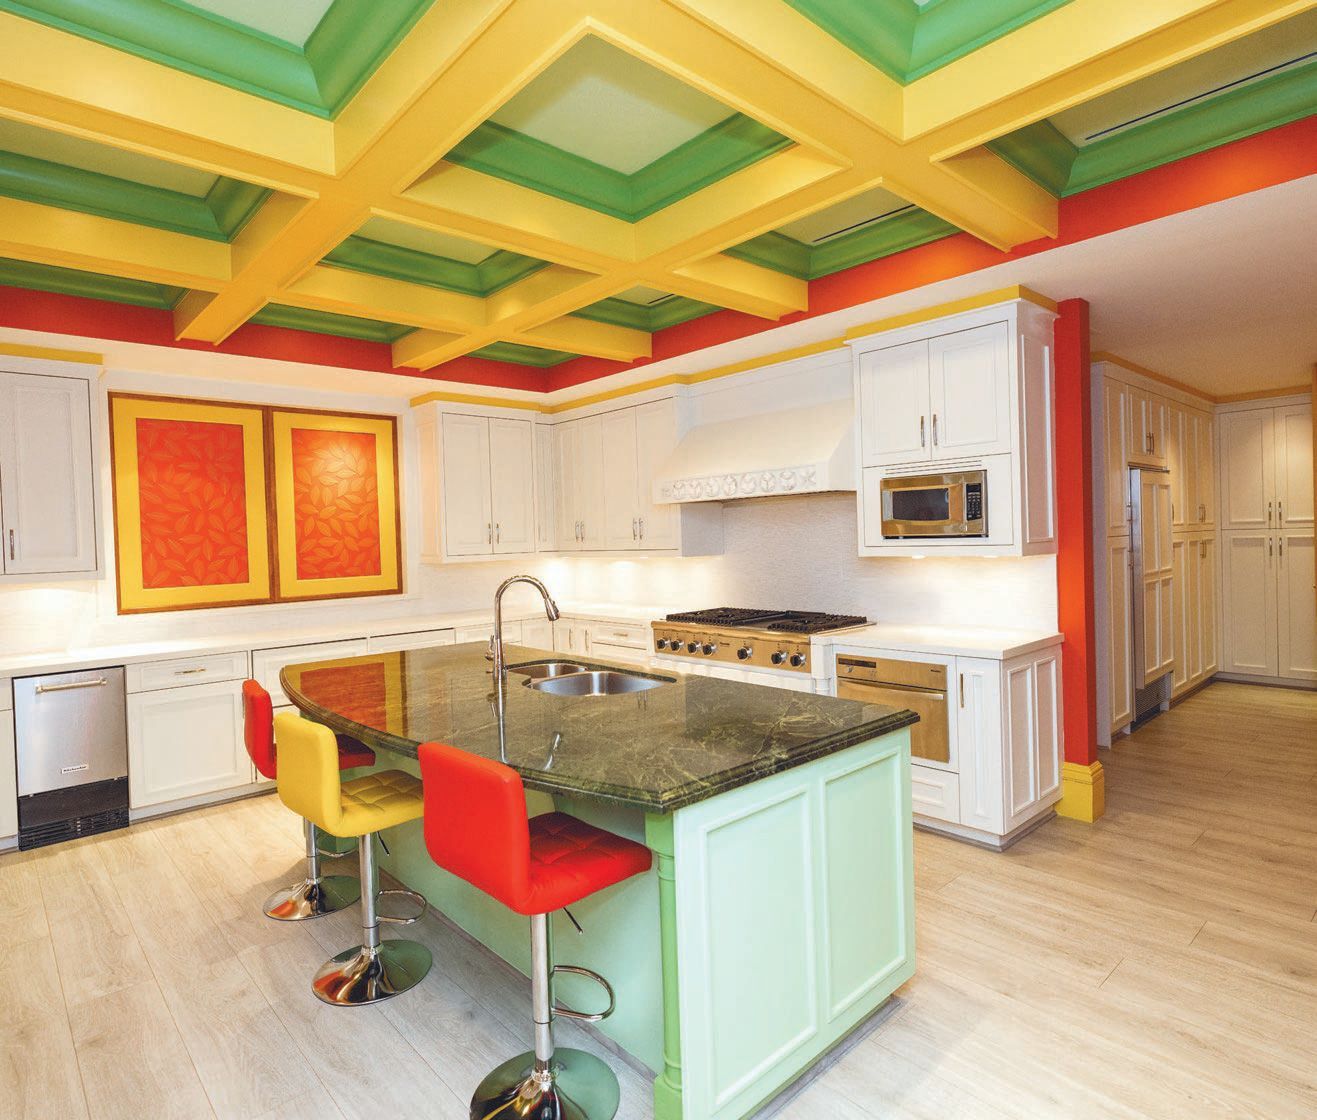 Lois Pope chose bright colors in her kitchen to inspire her
guests to find joy. PHOTOGRAPHED BY CAPEHART